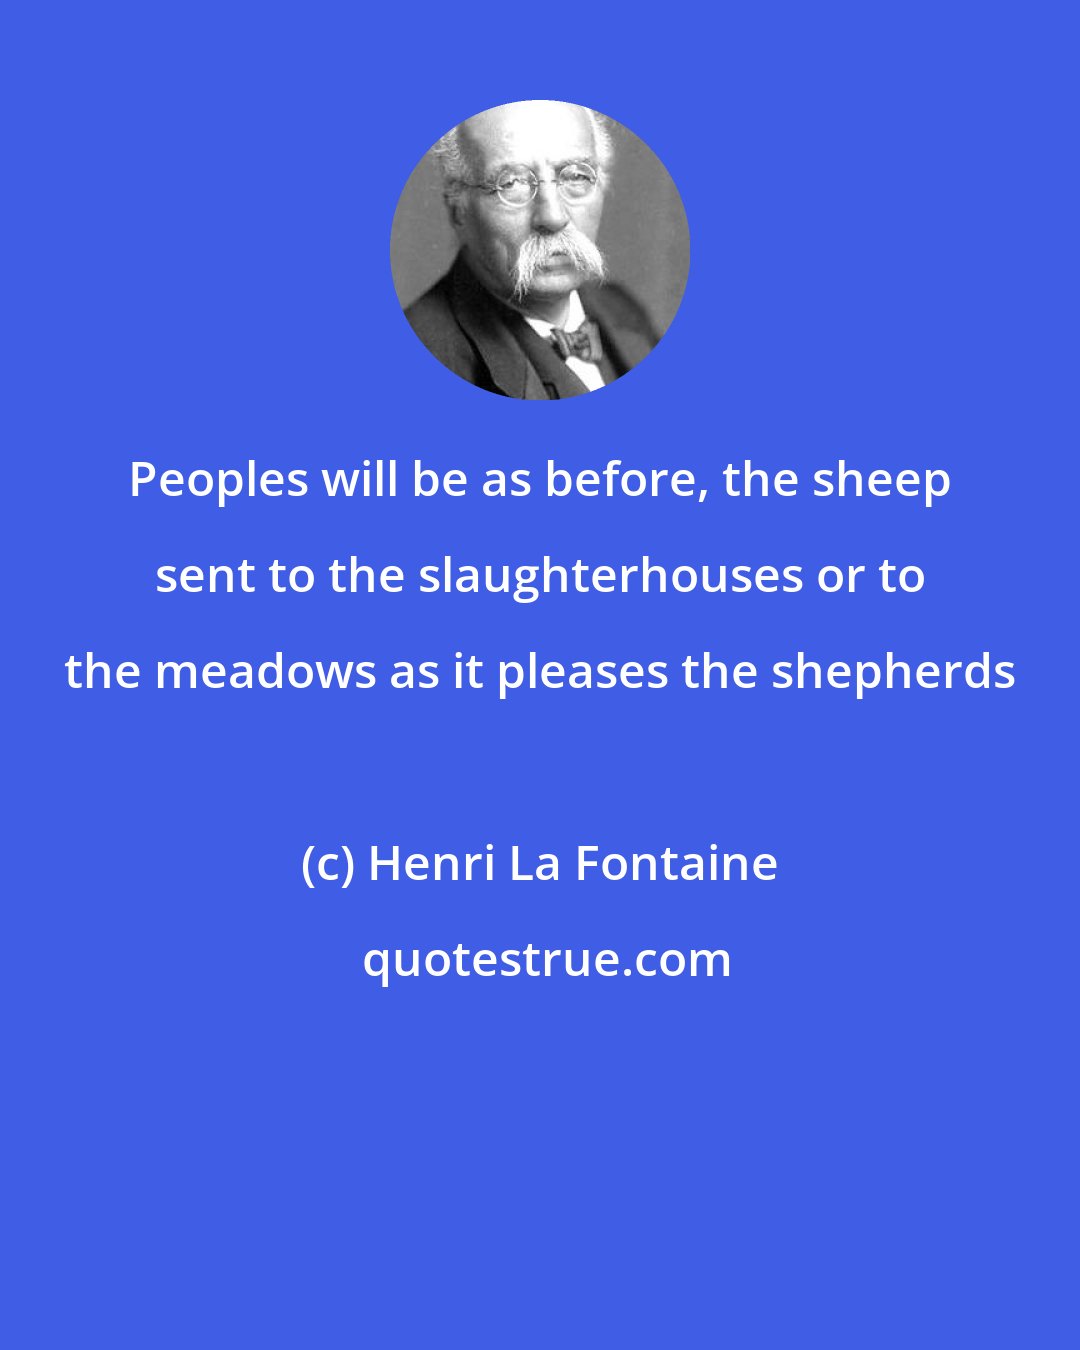 Henri La Fontaine: Peoples will be as before, the sheep sent to the slaughterhouses or to the meadows as it pleases the shepherds